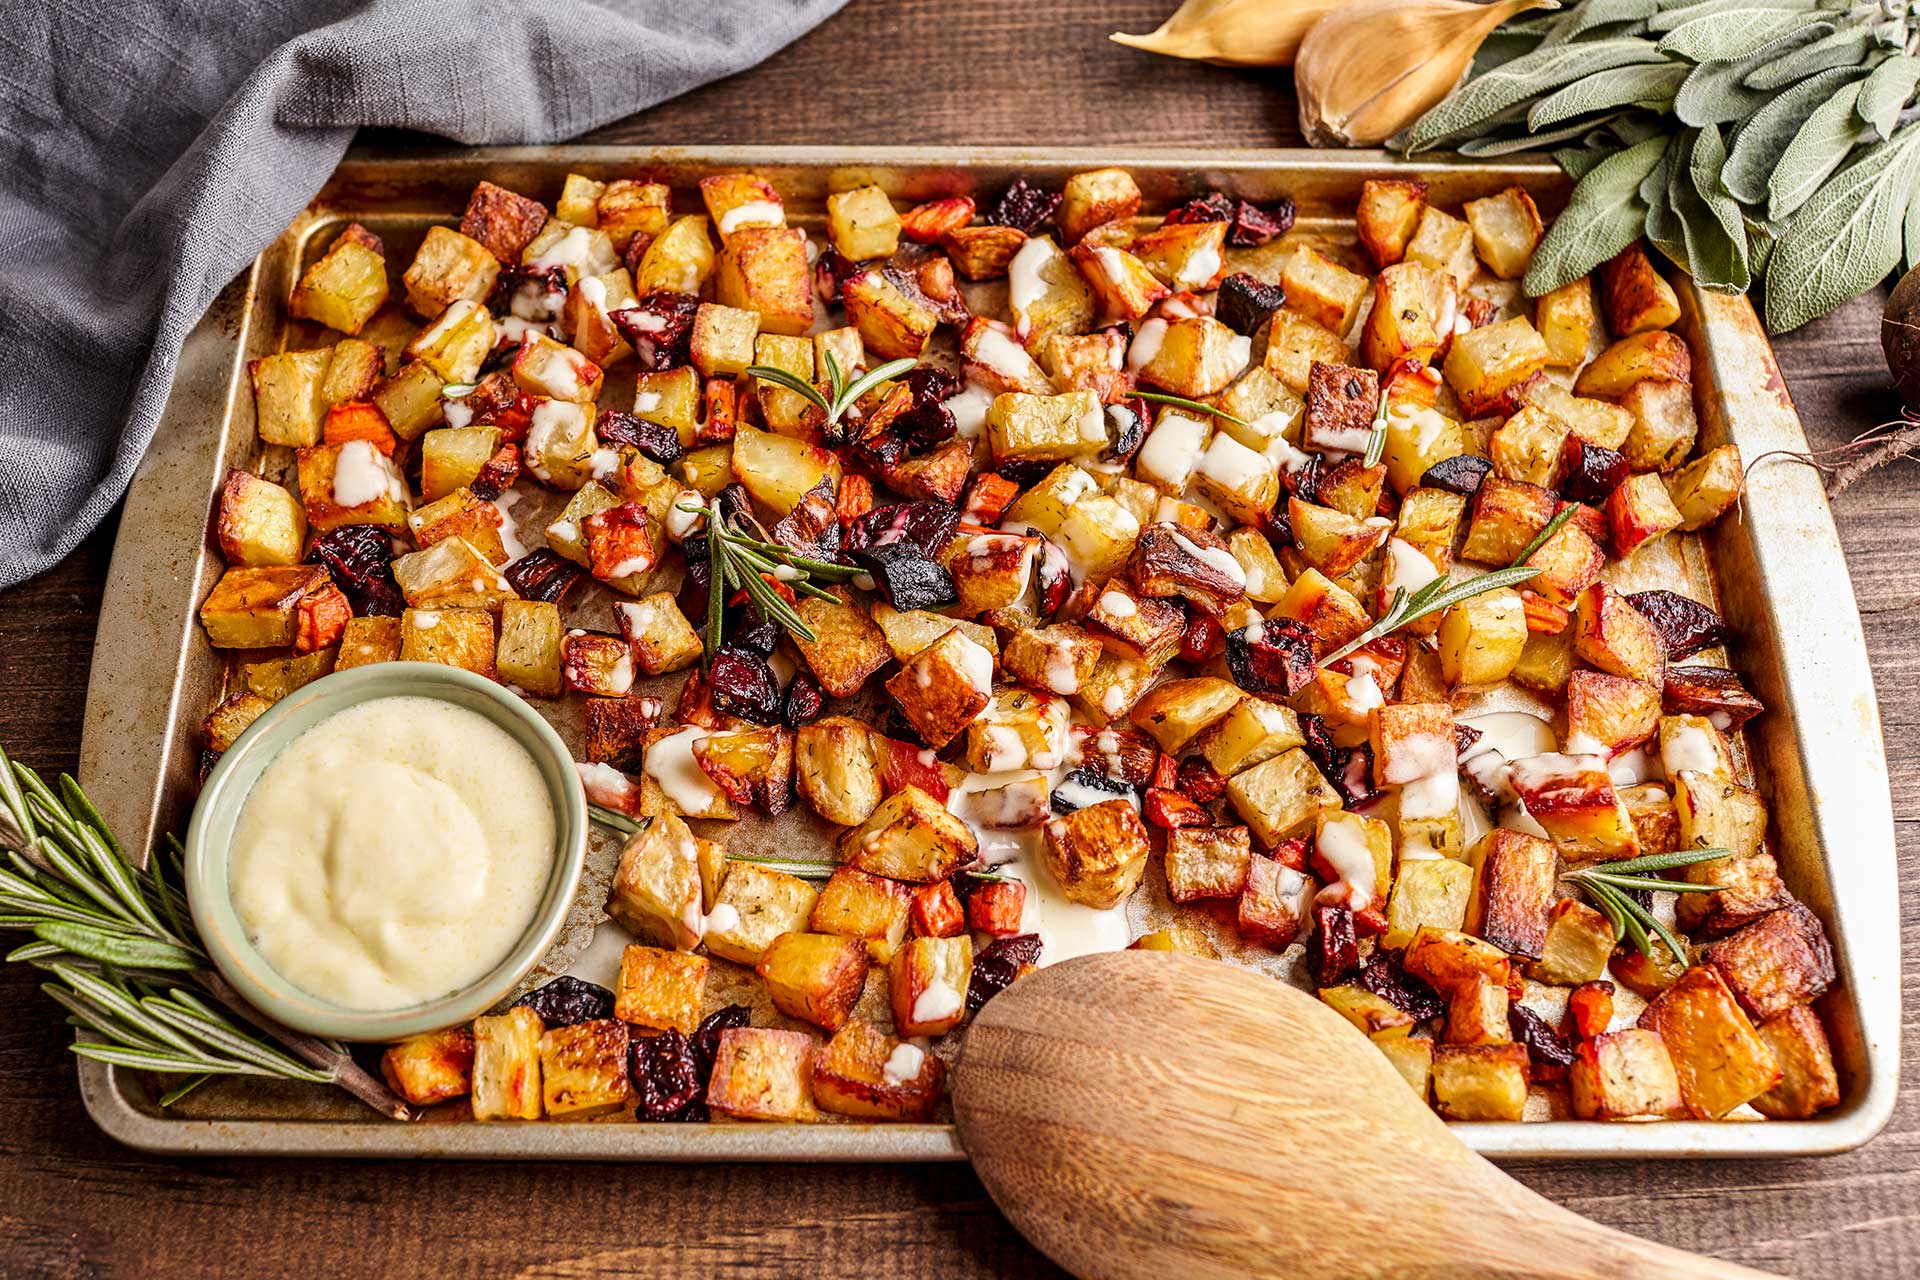 Roasted Winter Vegetables with Garlic 'Aioli'